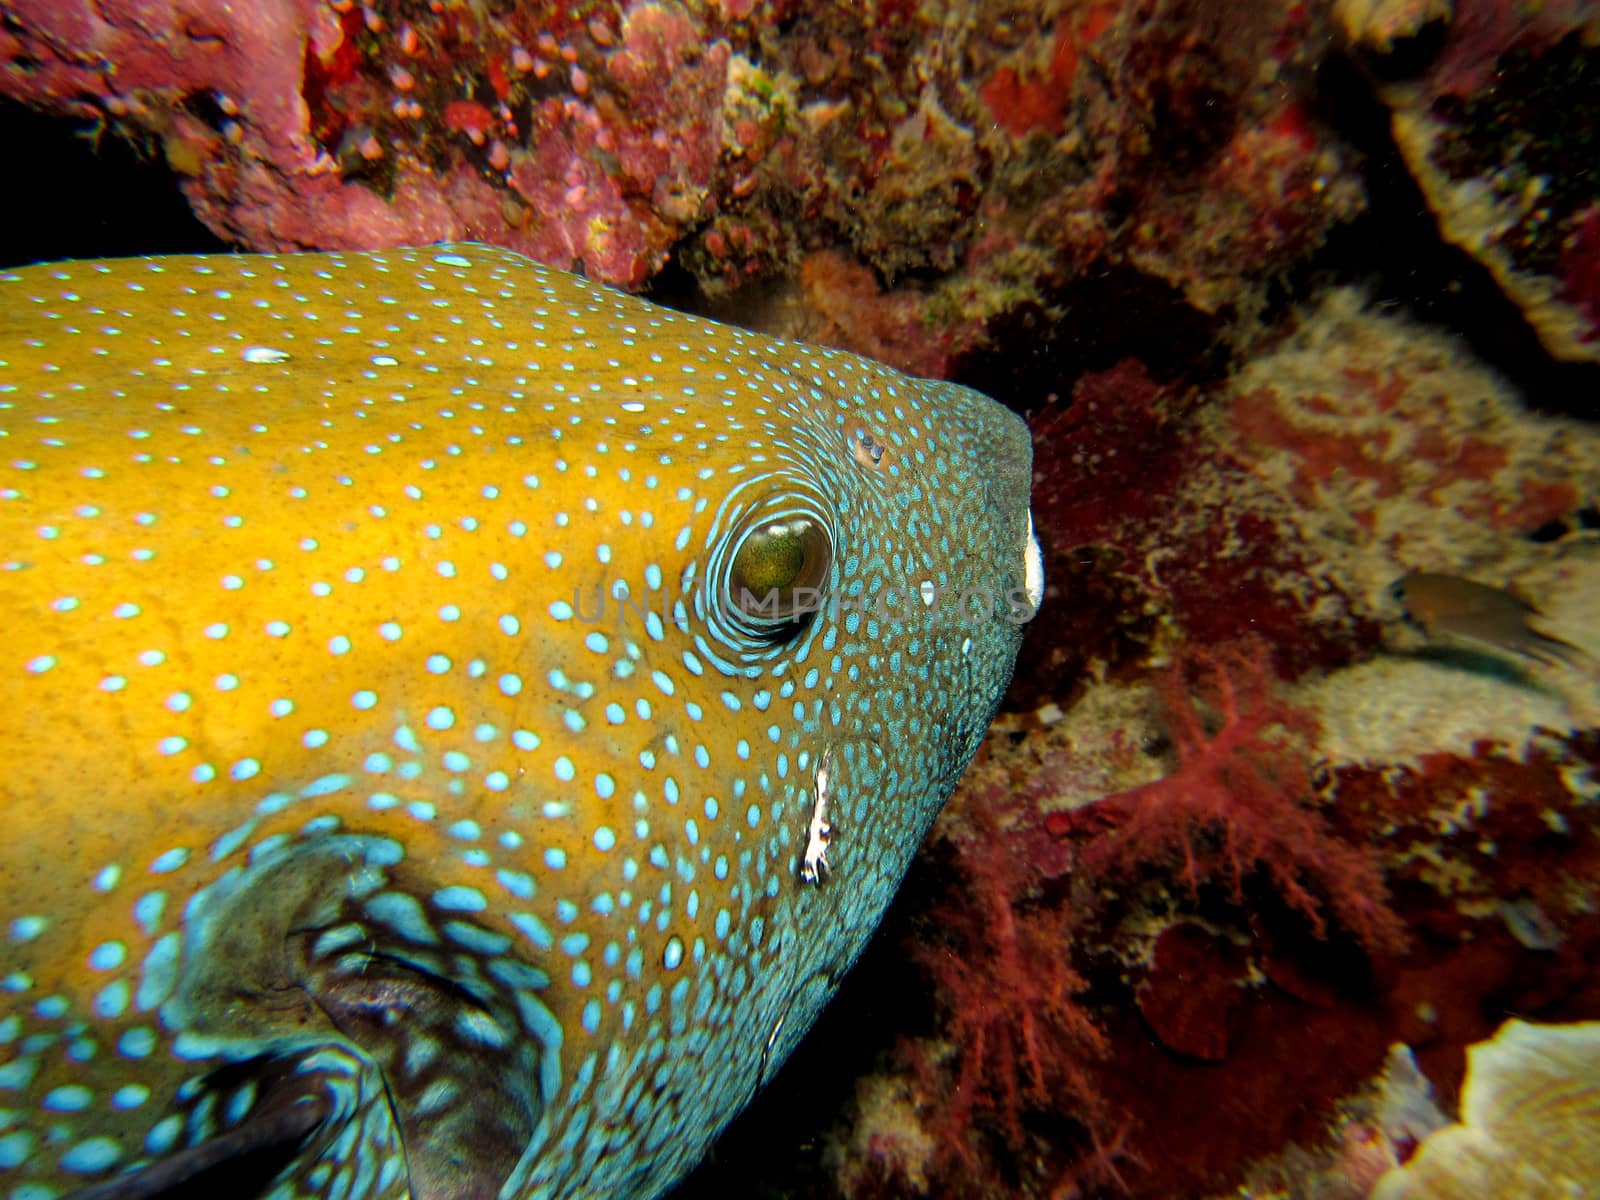 Yellow Pufferfish with Blue spots and scars